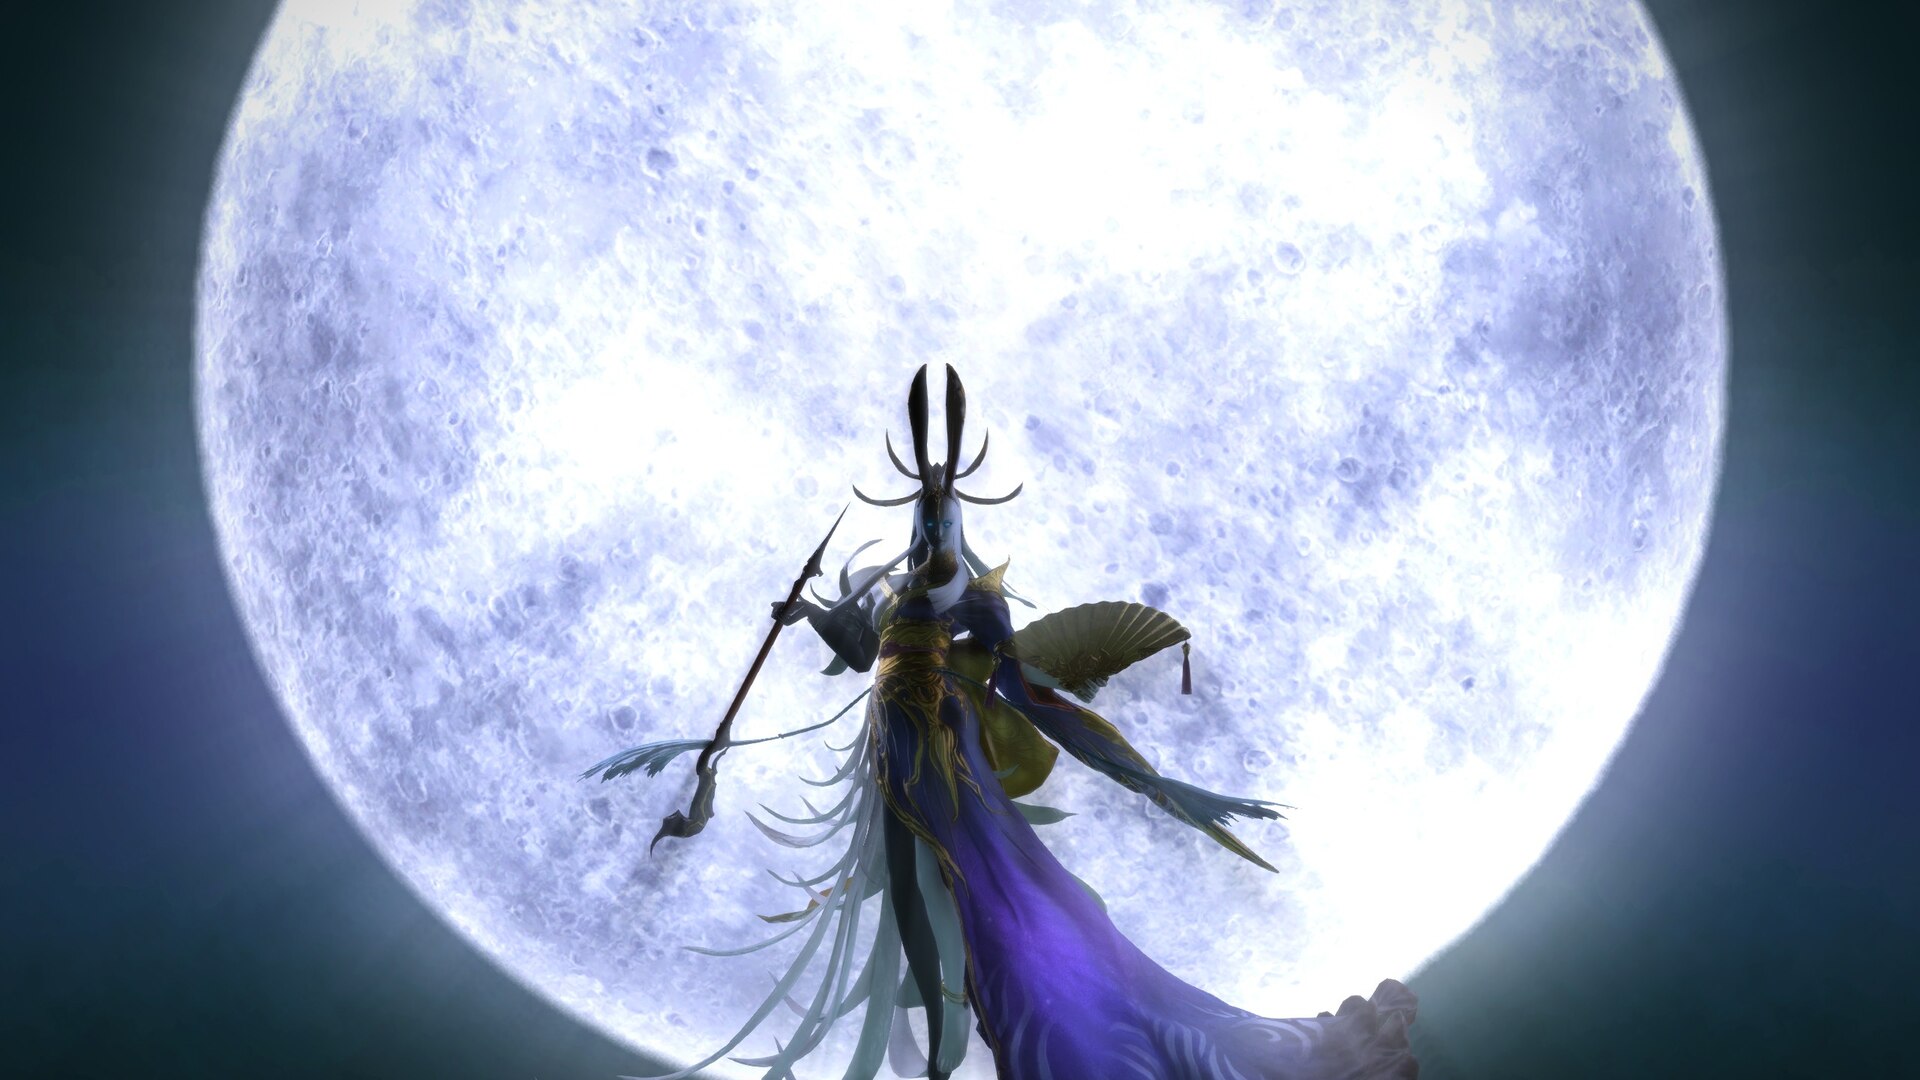 A moonlight boss, nice touch considering the character psyche in her last a...